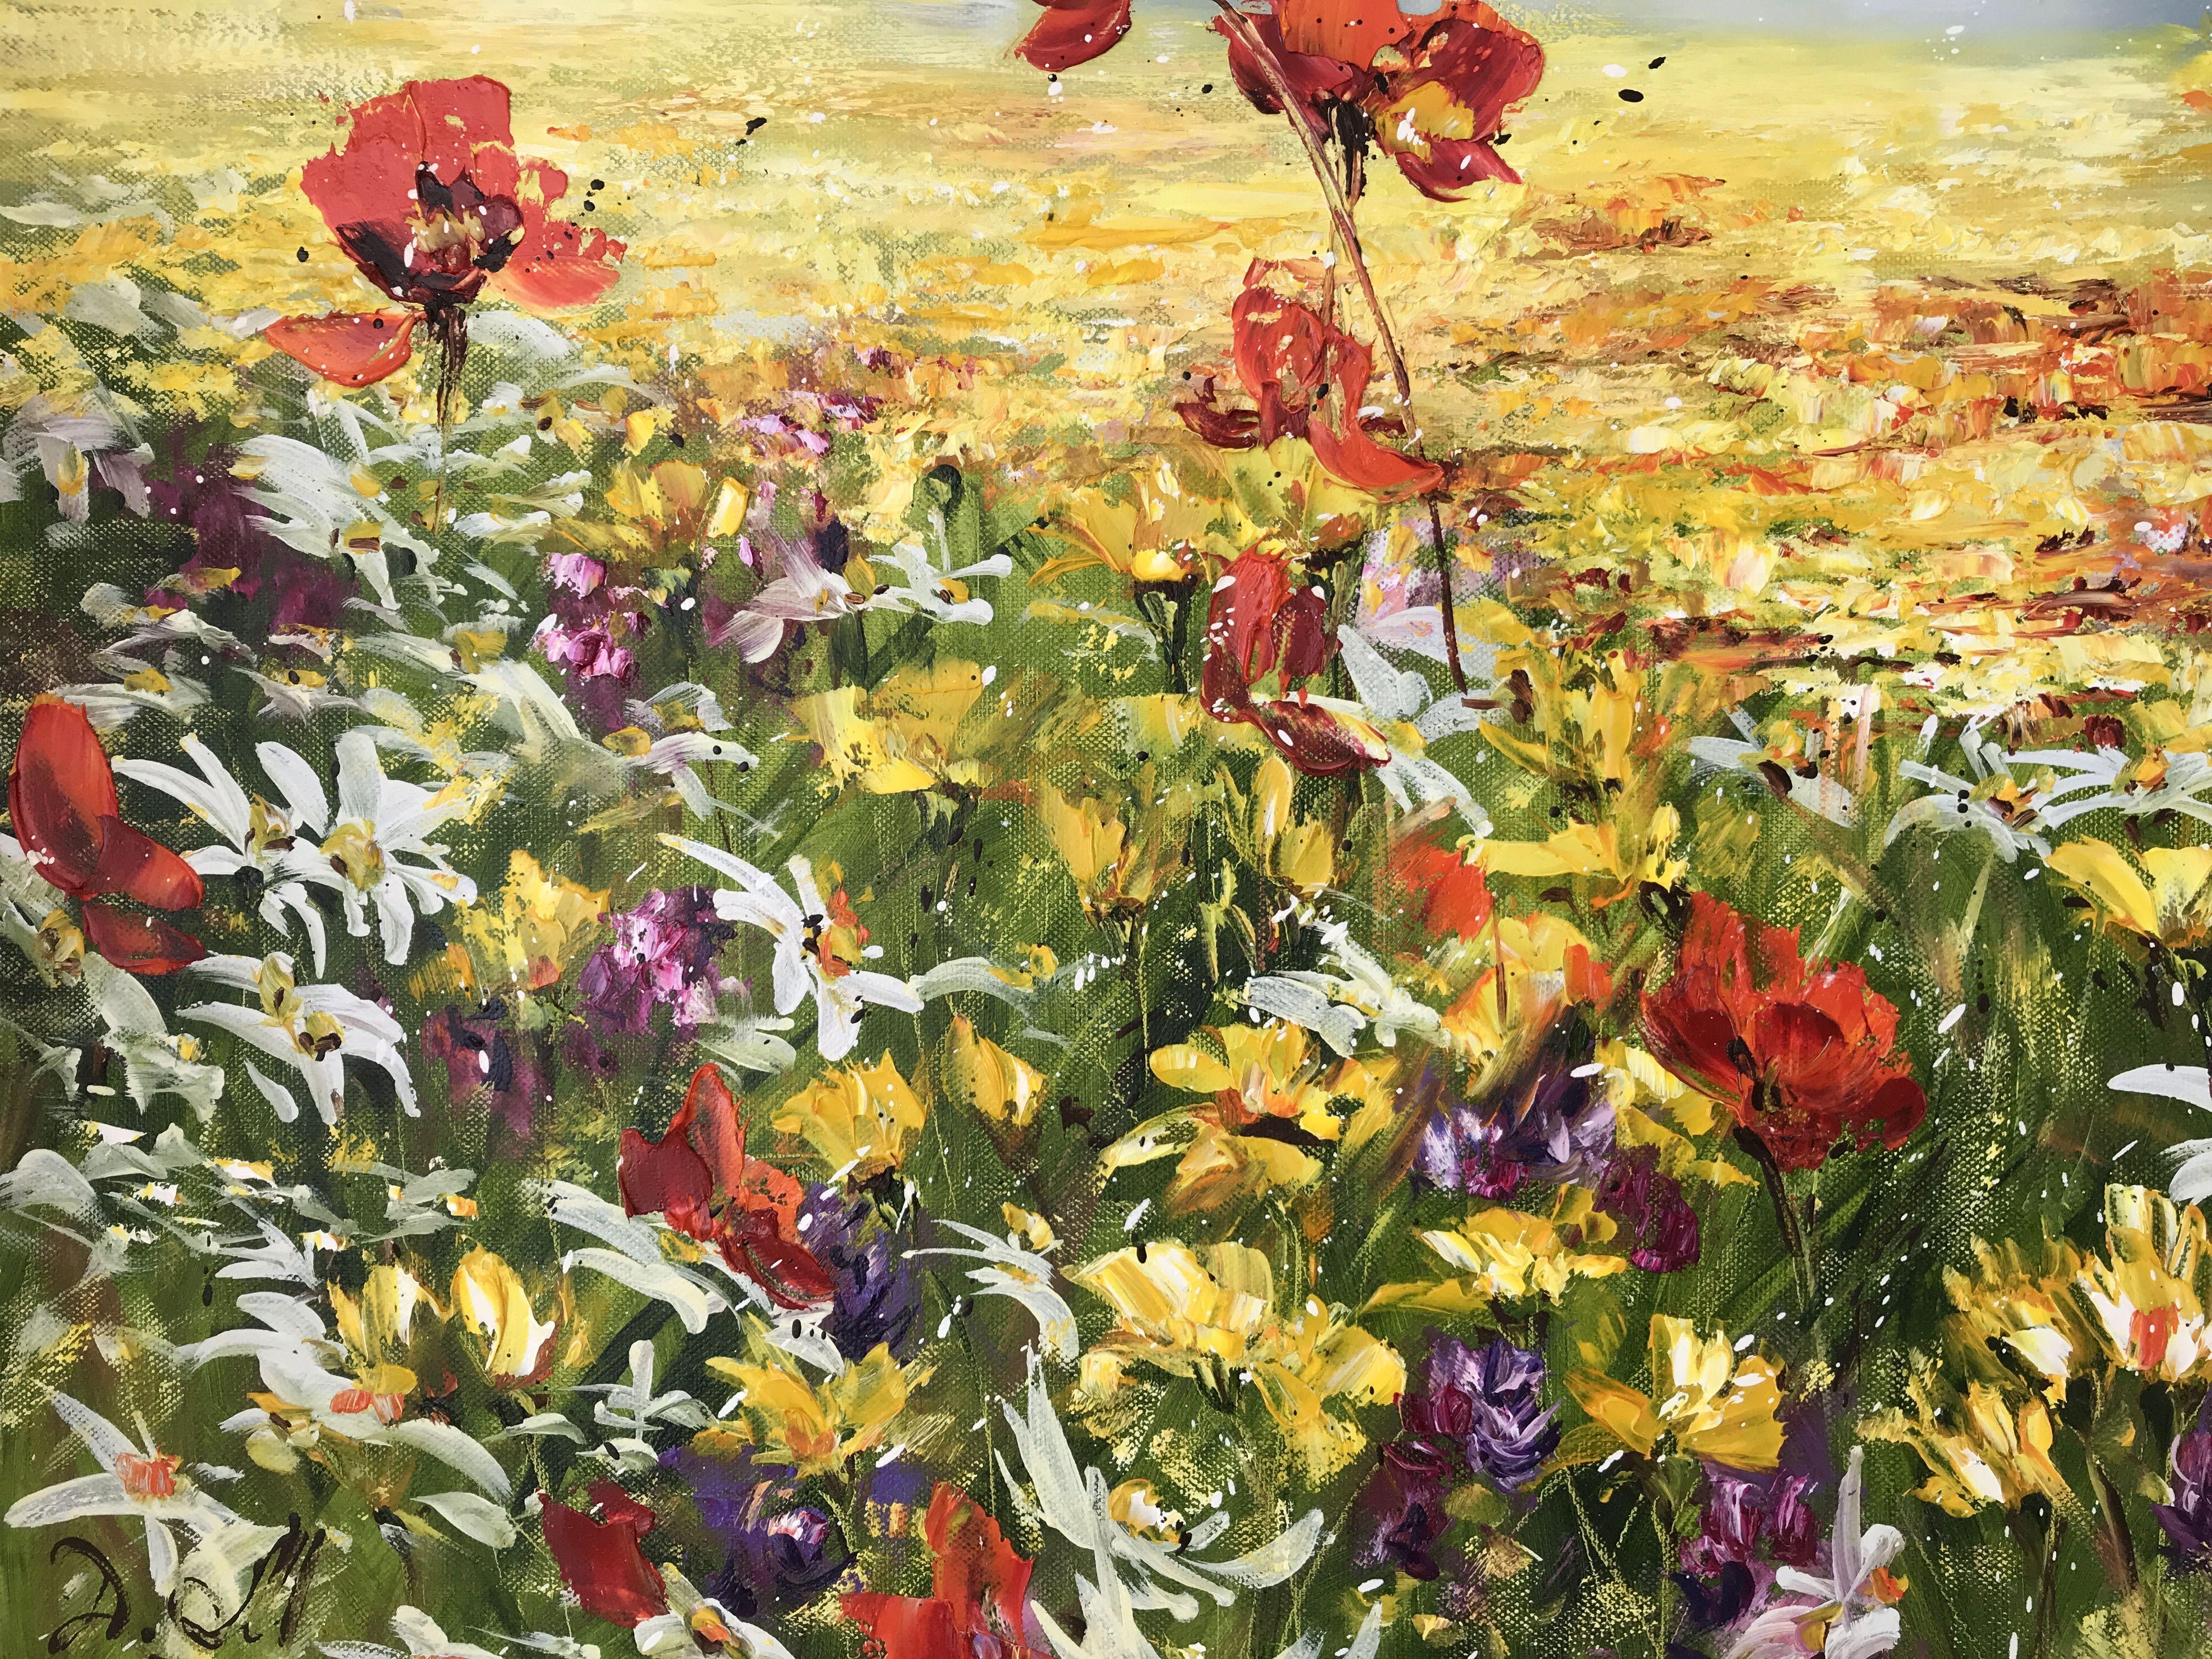 Scent of Summer Flowers, Painting, Oil on Canvas 2